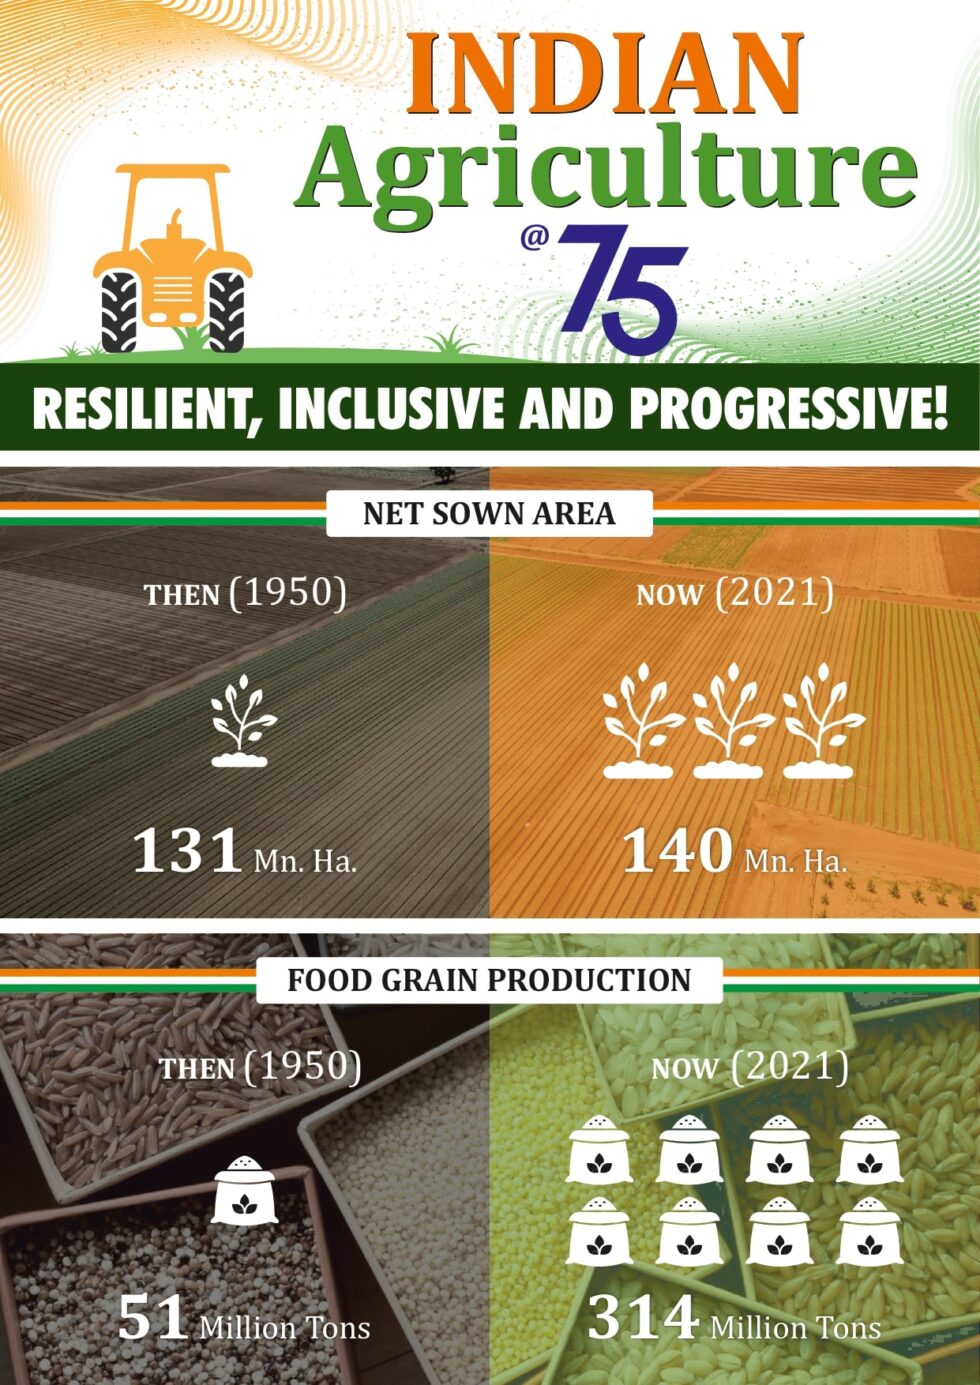 Indian Agriculture 75. Resilient, Inclusive, and Progressive Growth